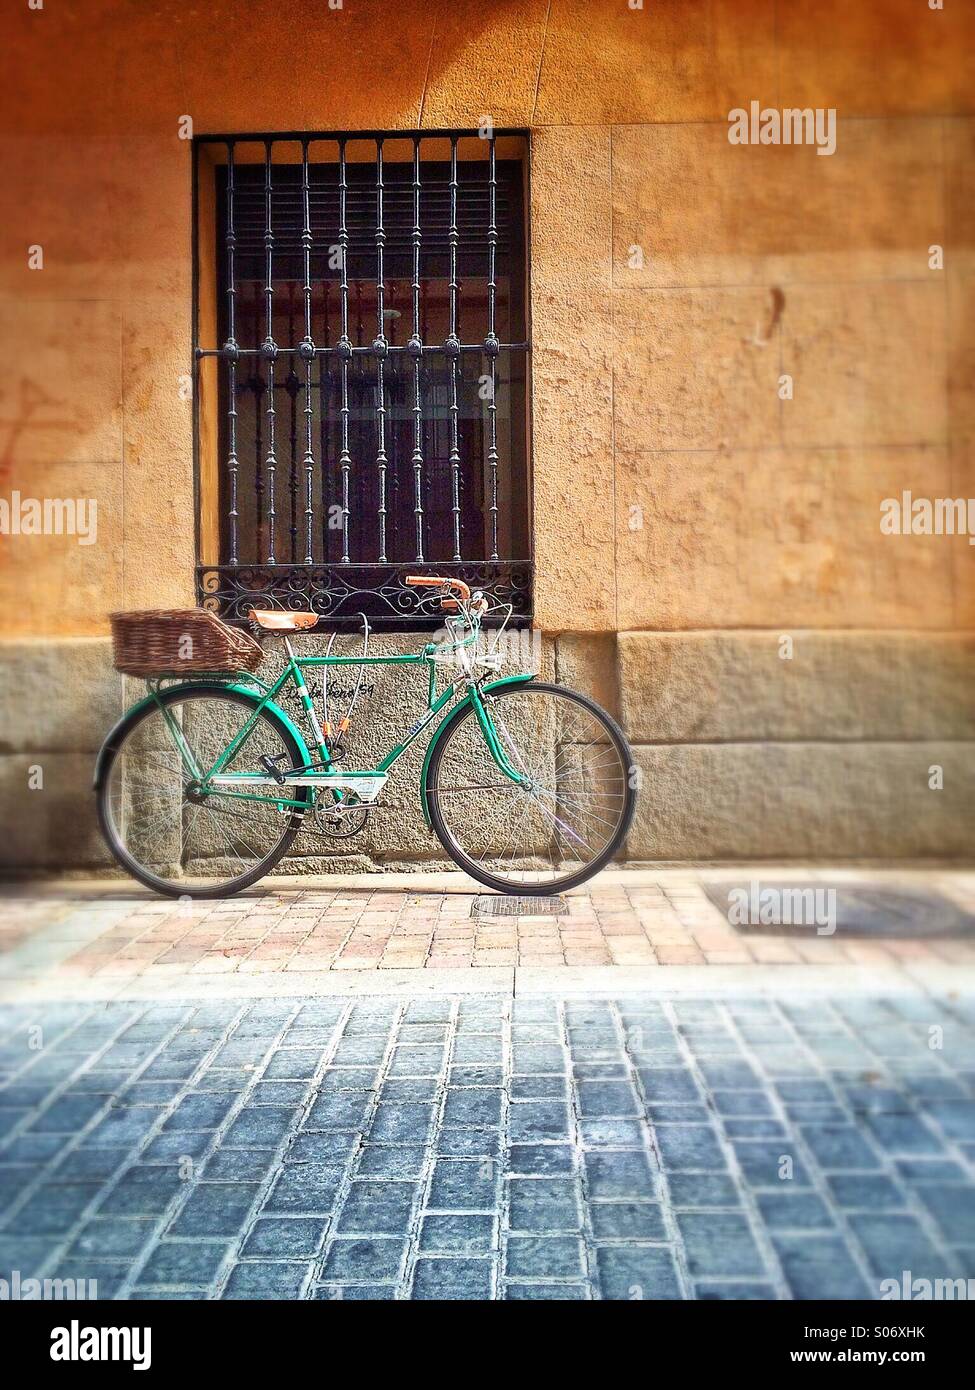 Bicycle leaning against wall under ornate window, Madrid, Spain Stock Photo